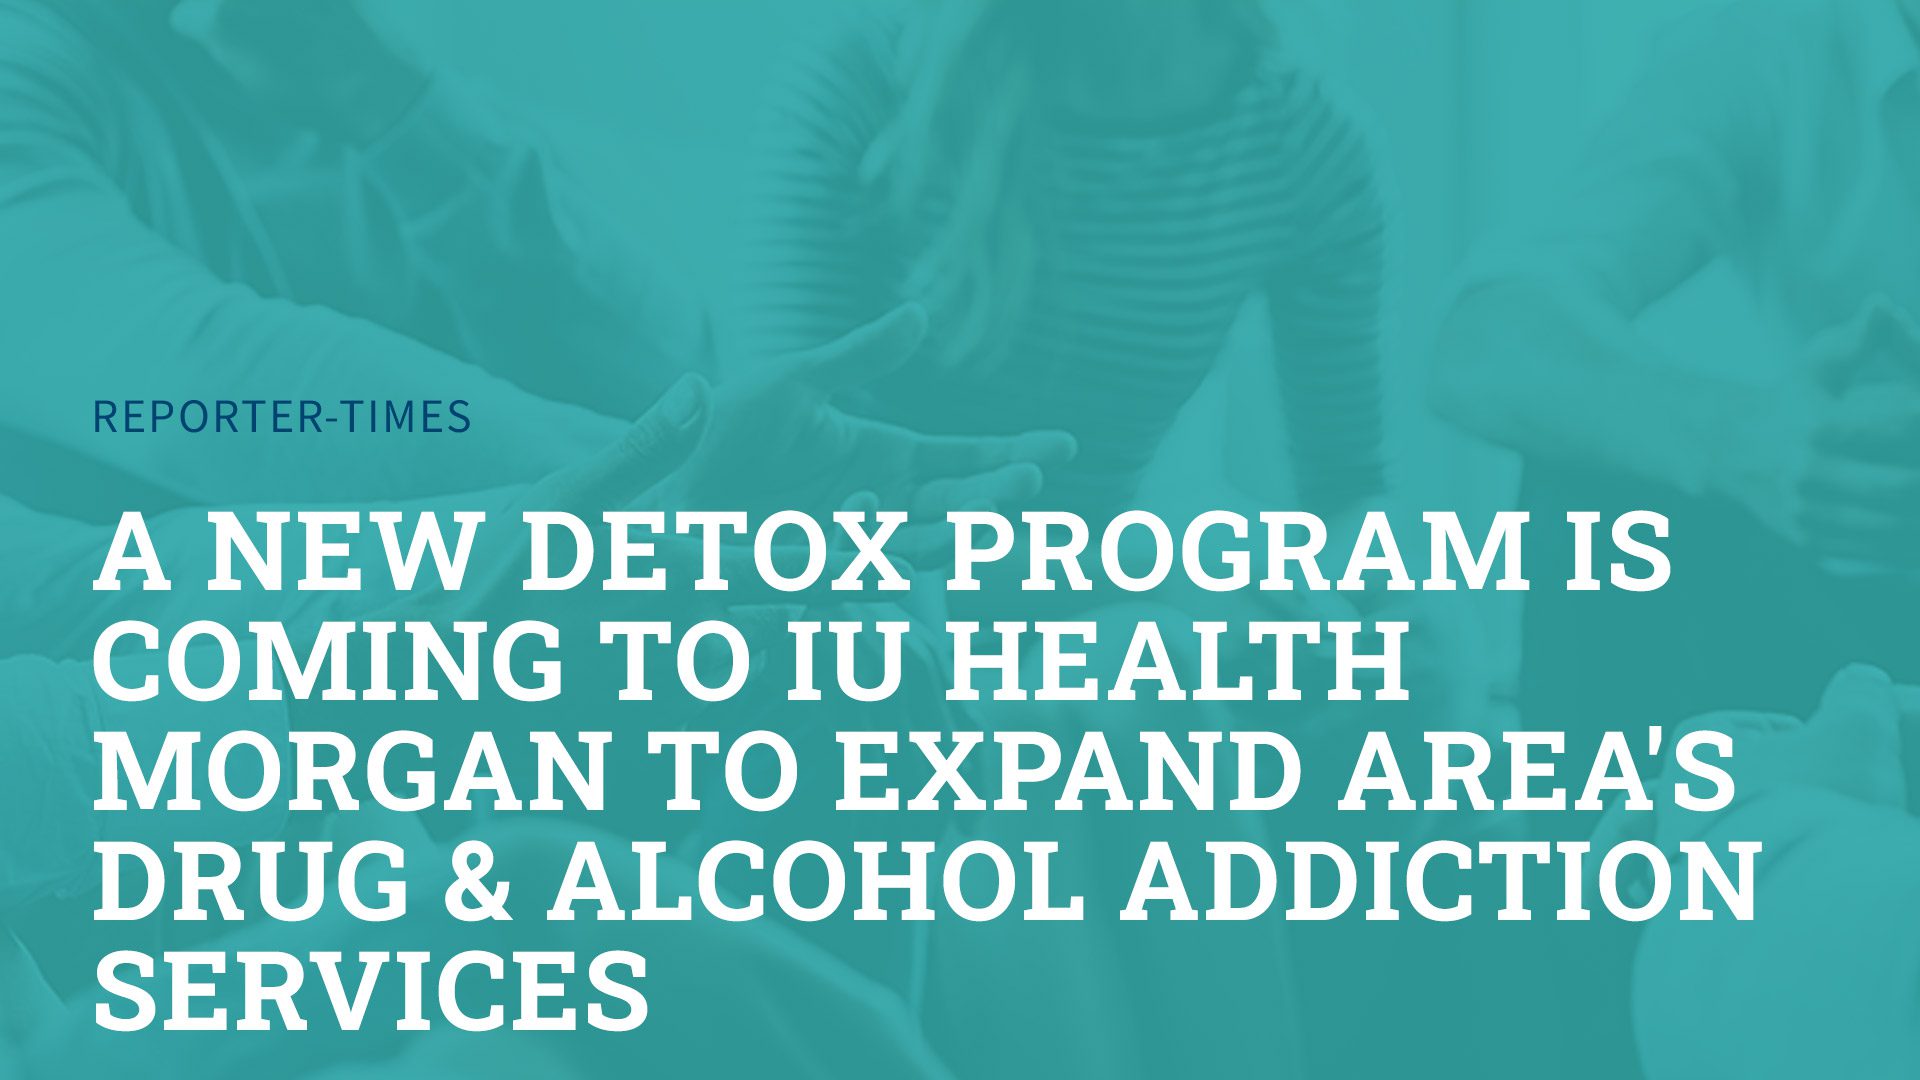 A new detox program is coming to IU Health Morgan to expand area’s drug & alcohol addiction services